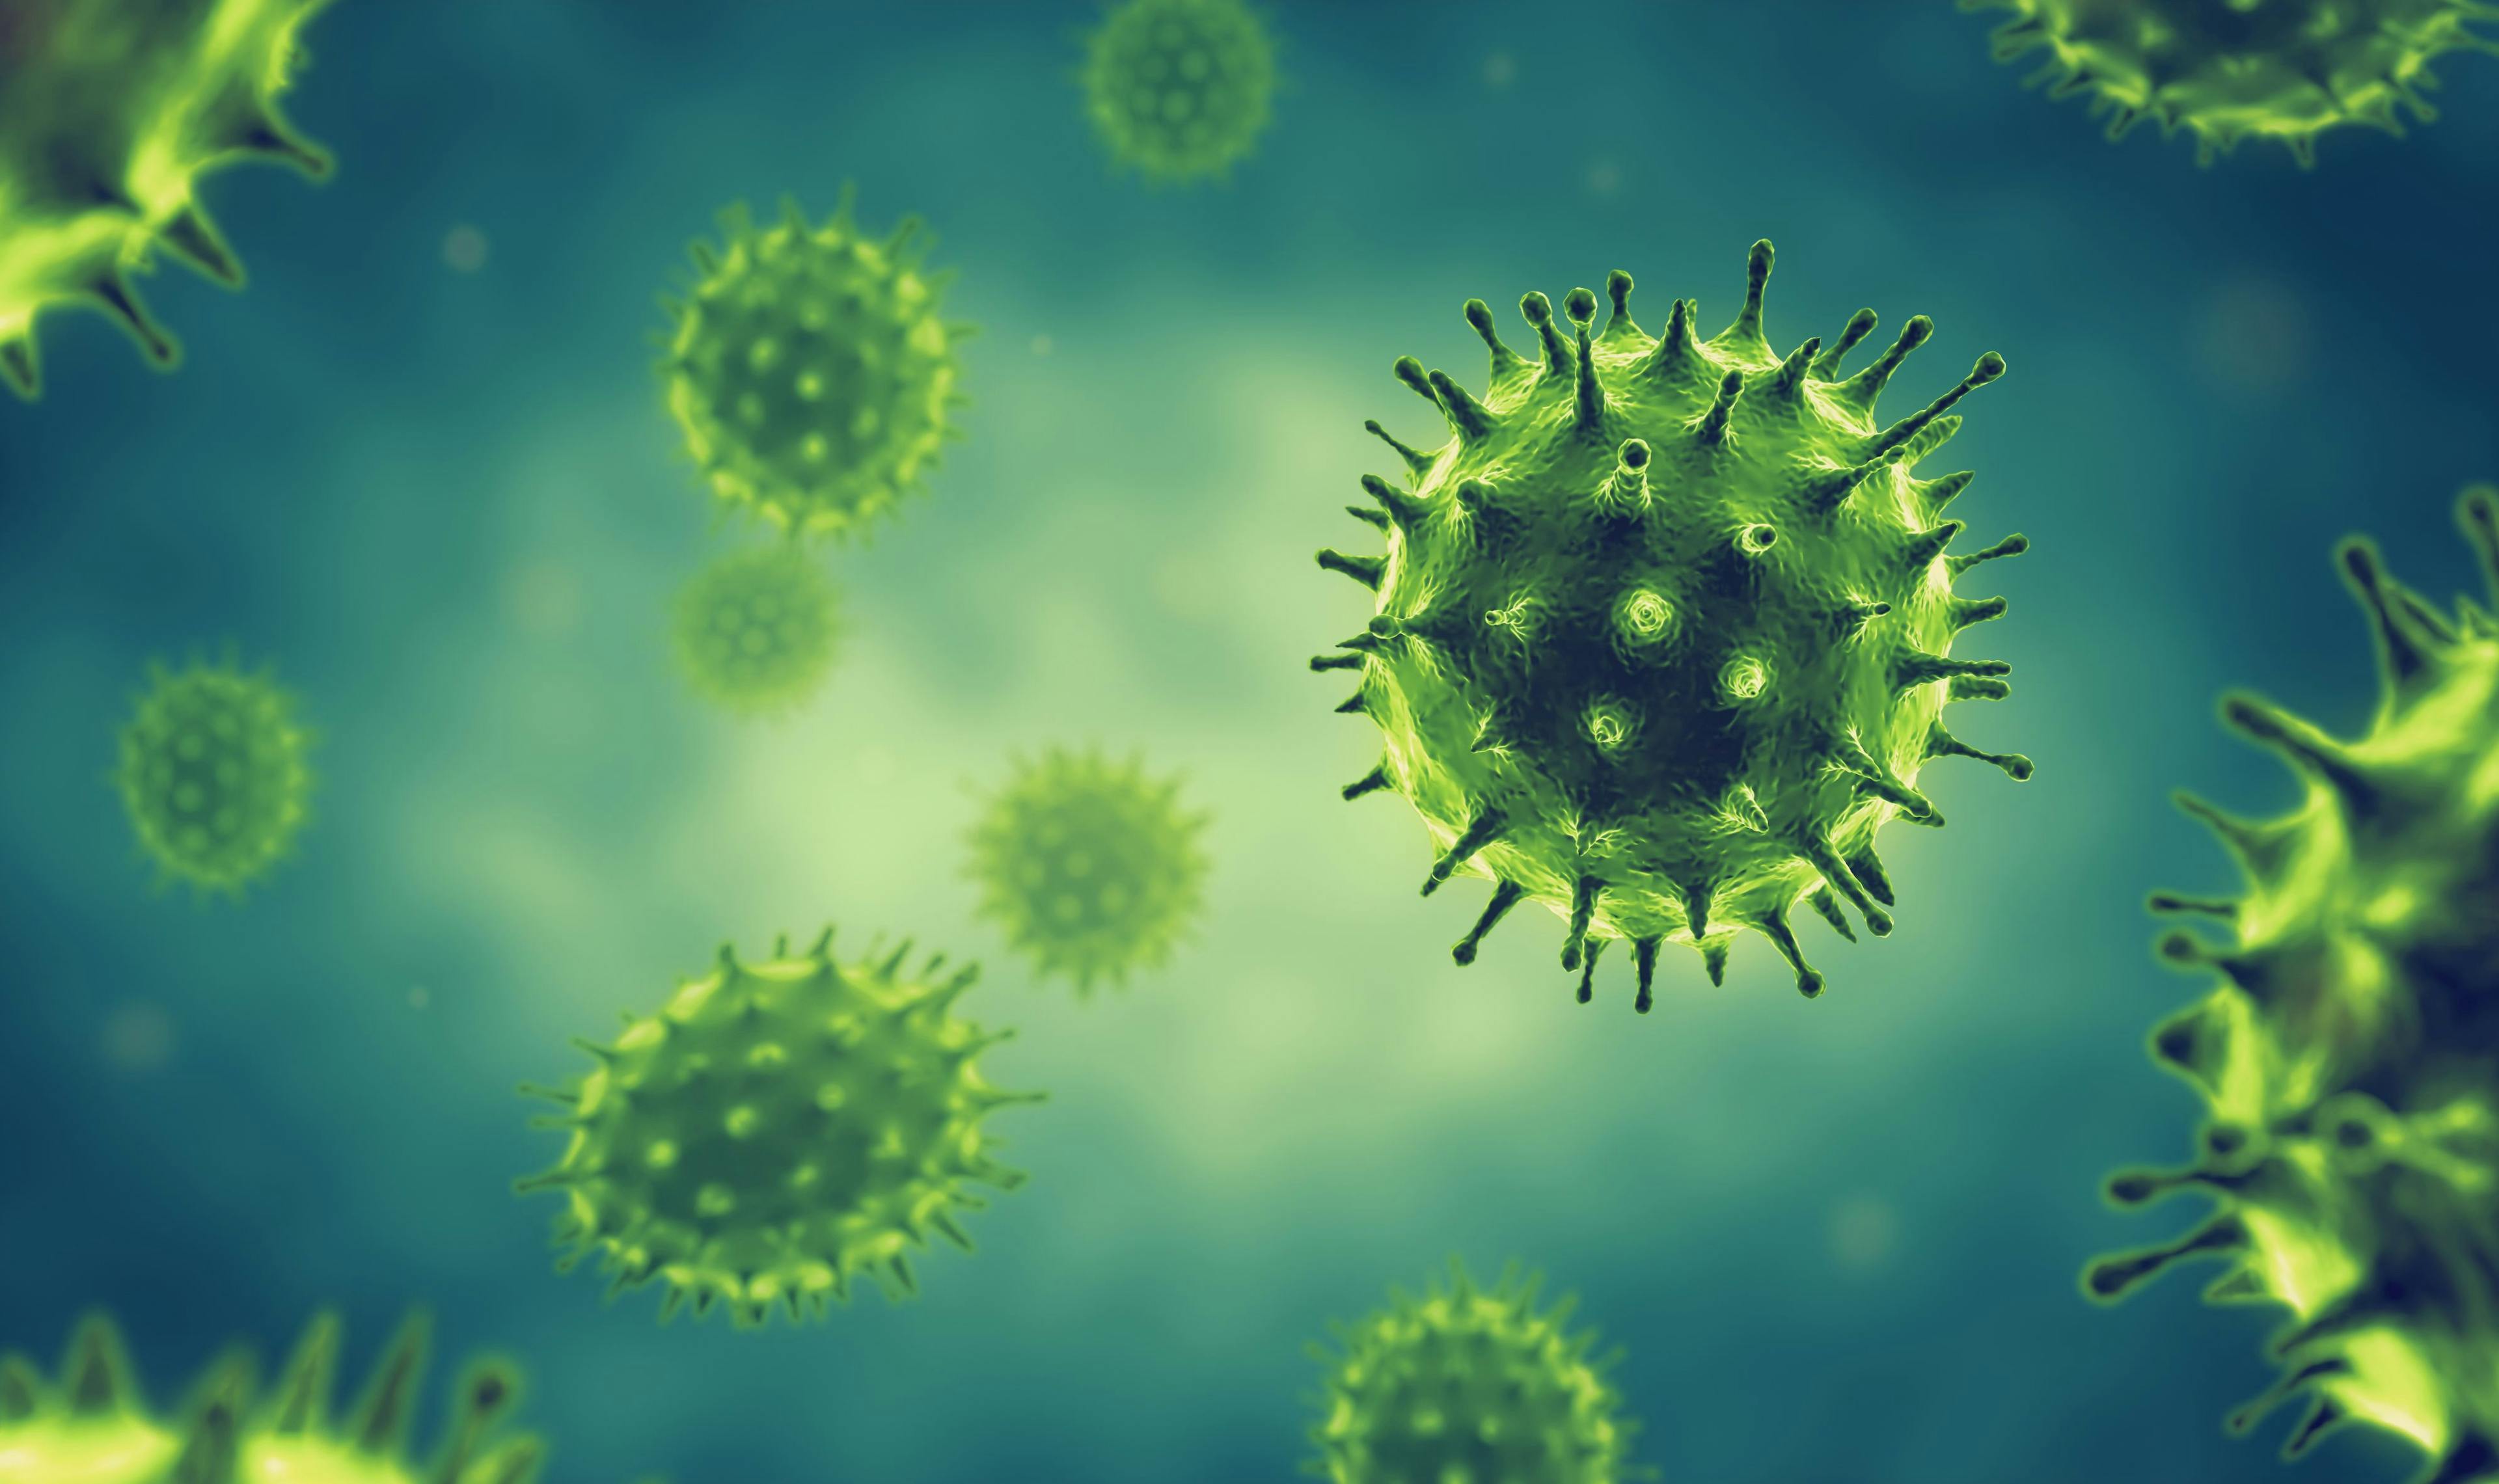 Study: Possible New Antivirals May Be Protective Against Herpes, Other Infections